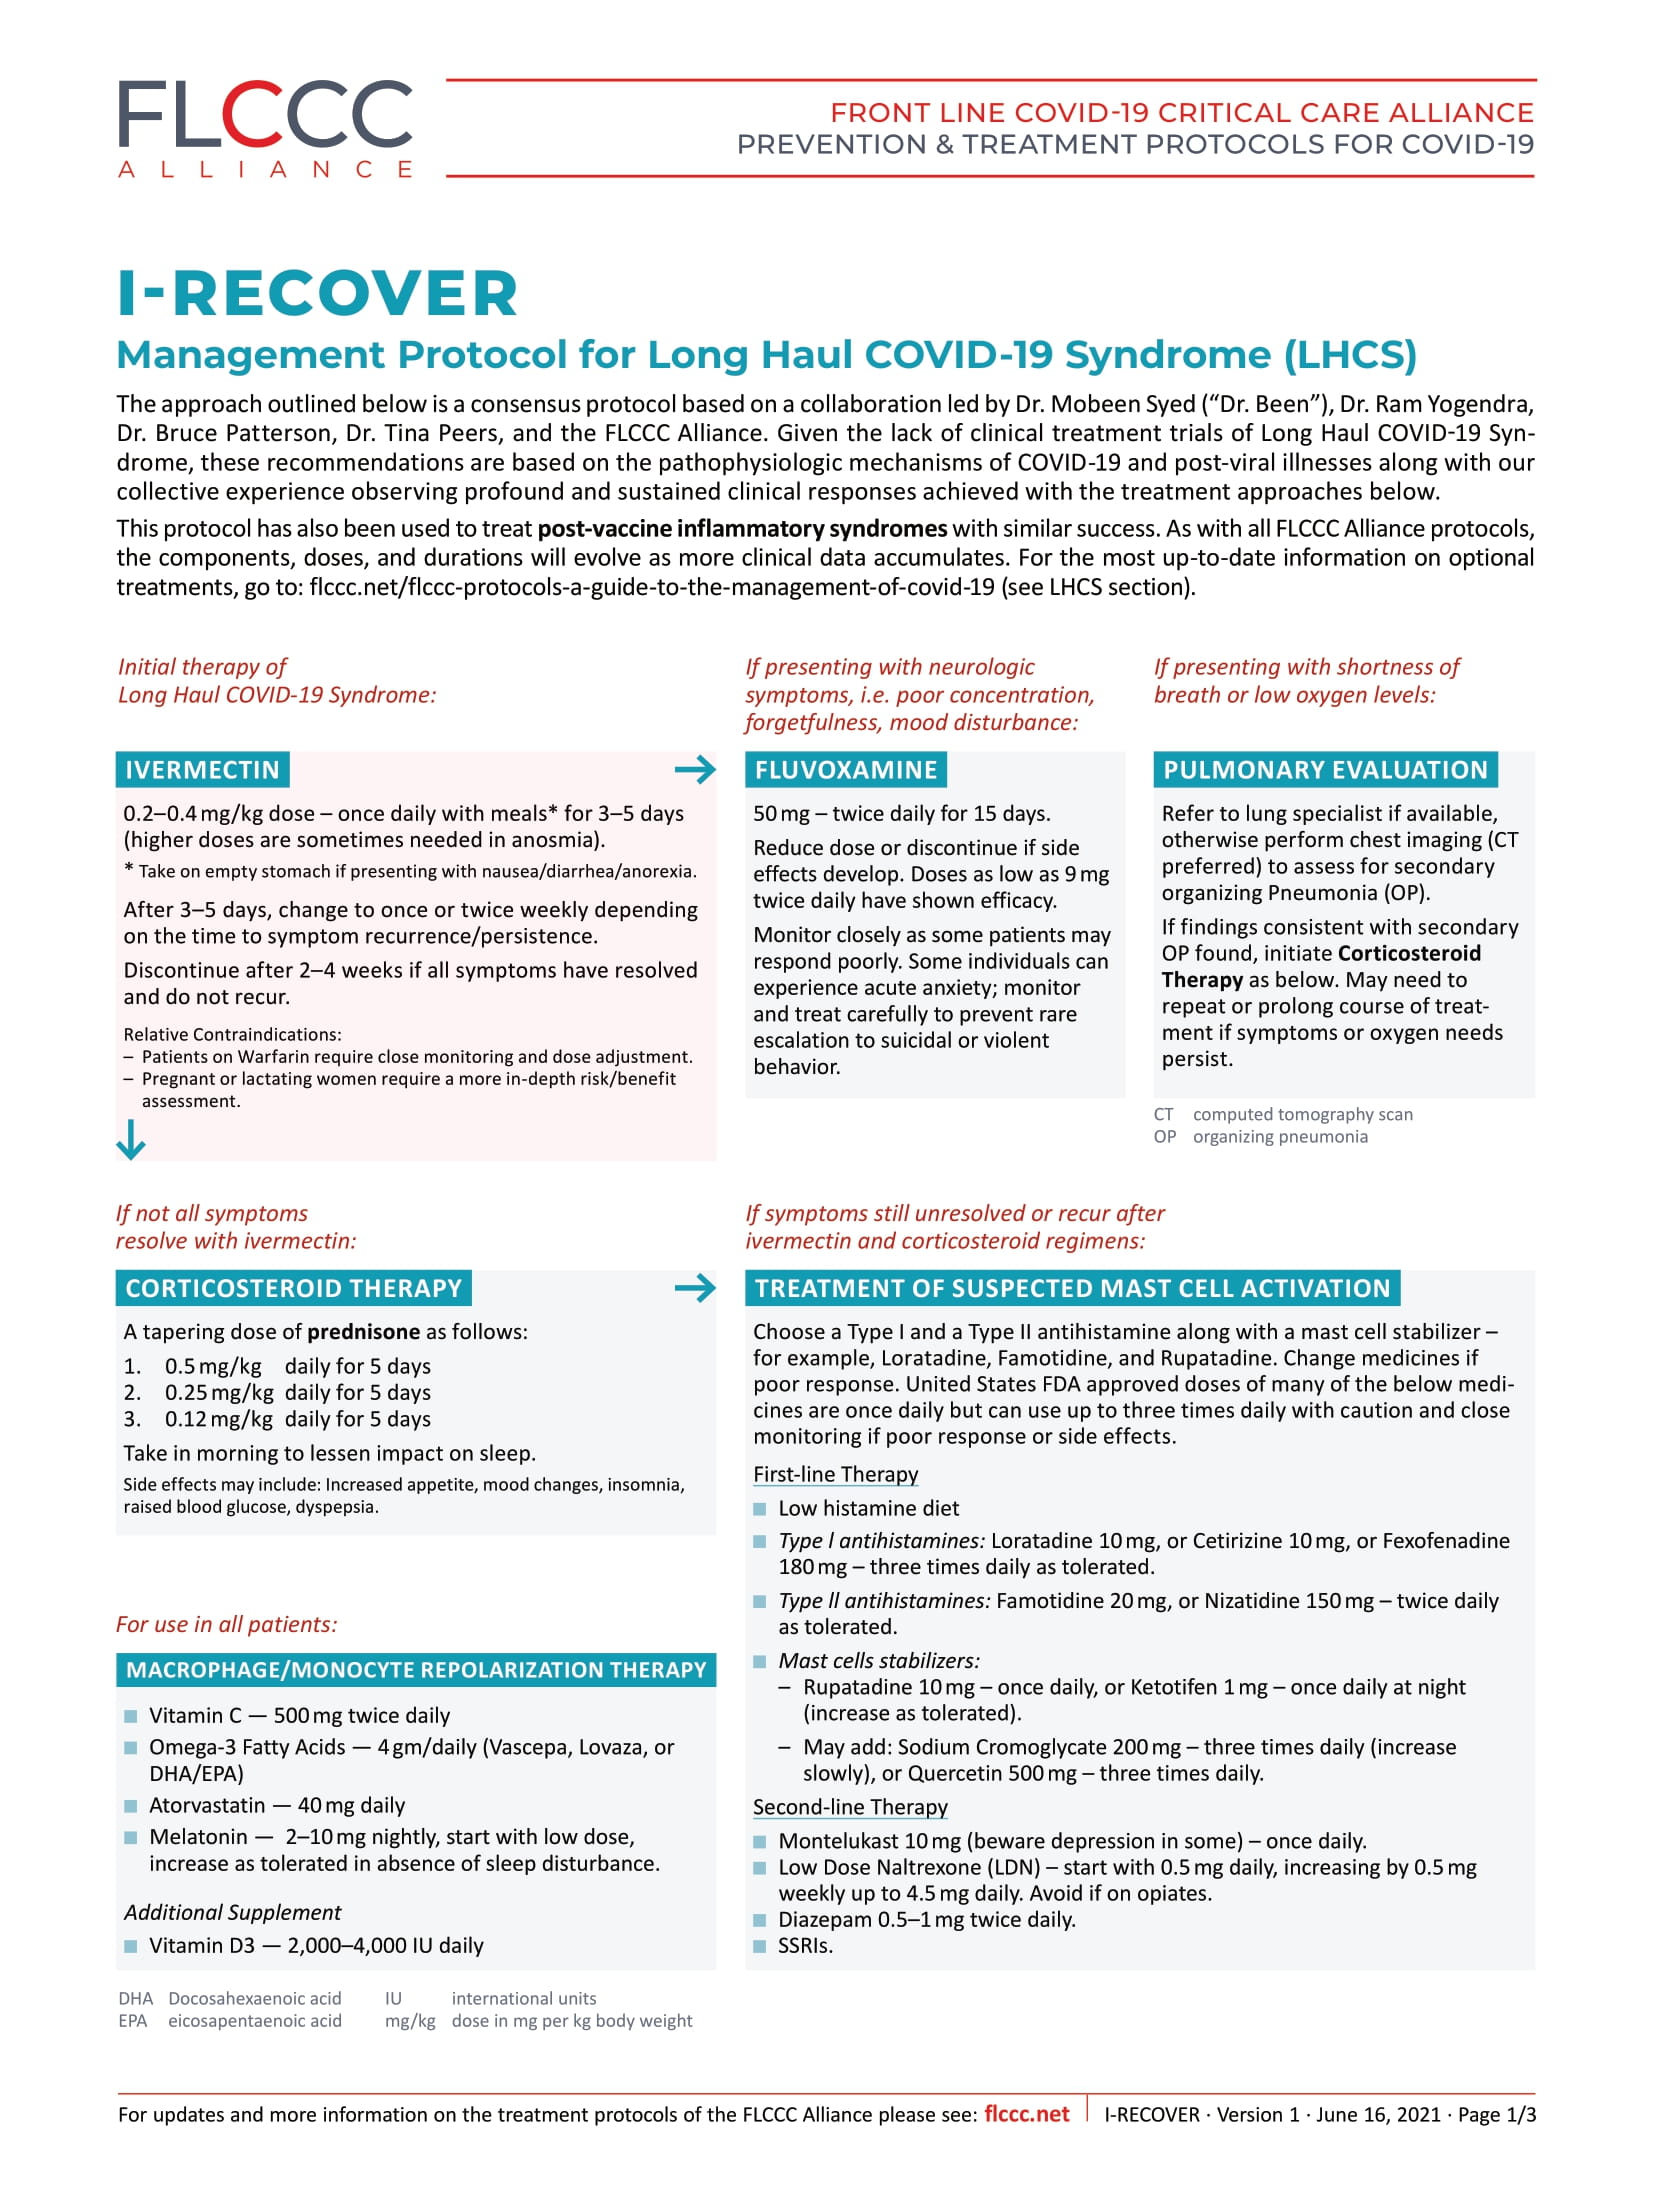 FLCCC Alliance I RECOVER Management Protocol for Long Haul COVID 19 Syndrome 1